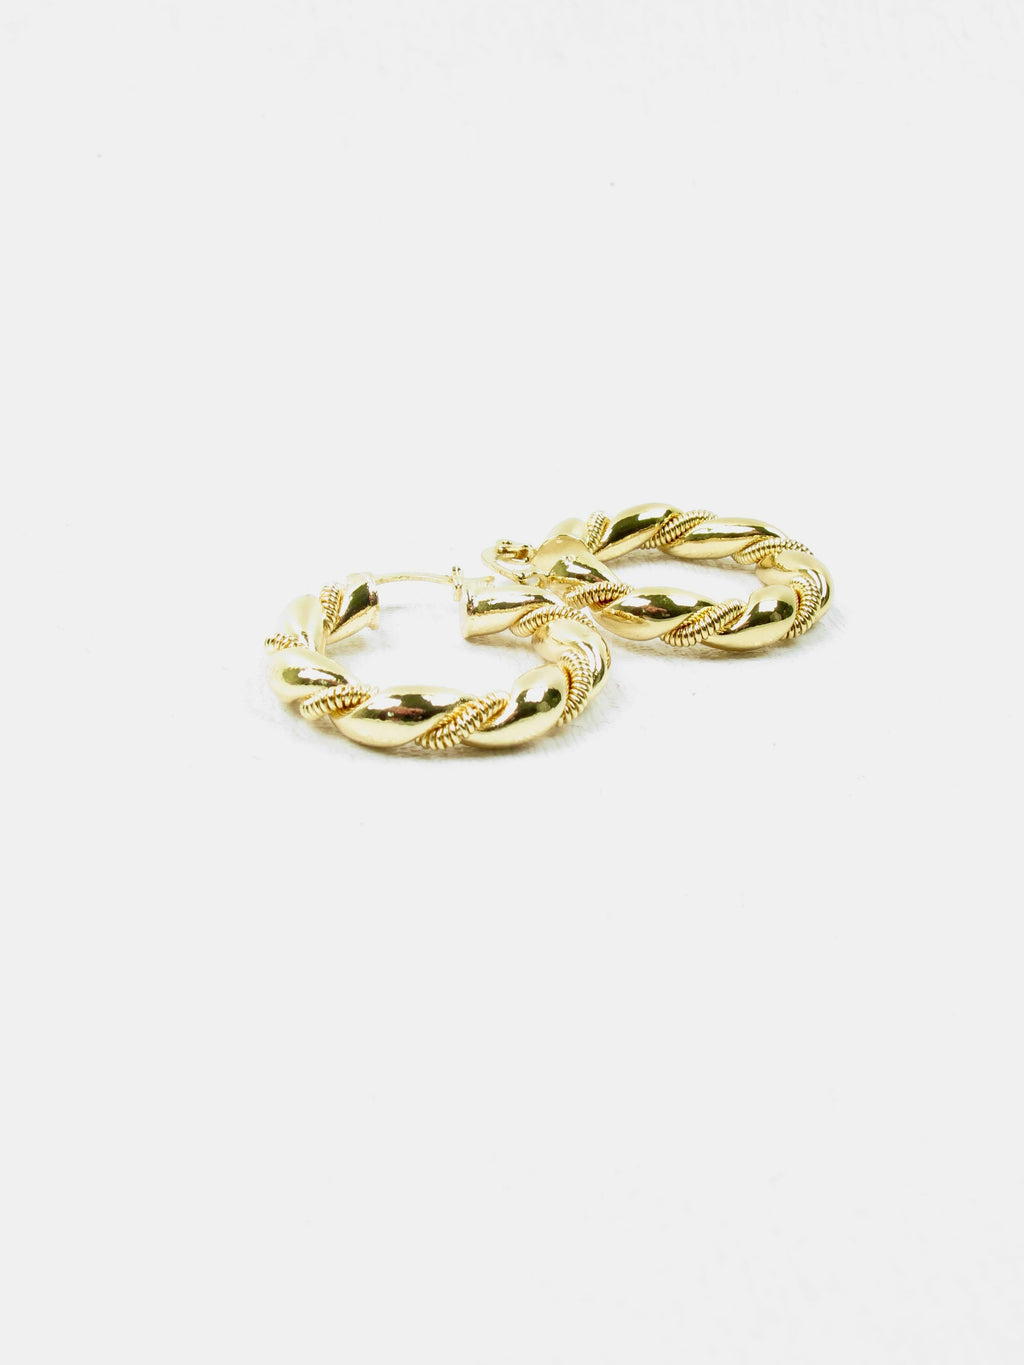 Vintage Style Gold Plated Twisted Hoop Earrings - The Harlequin